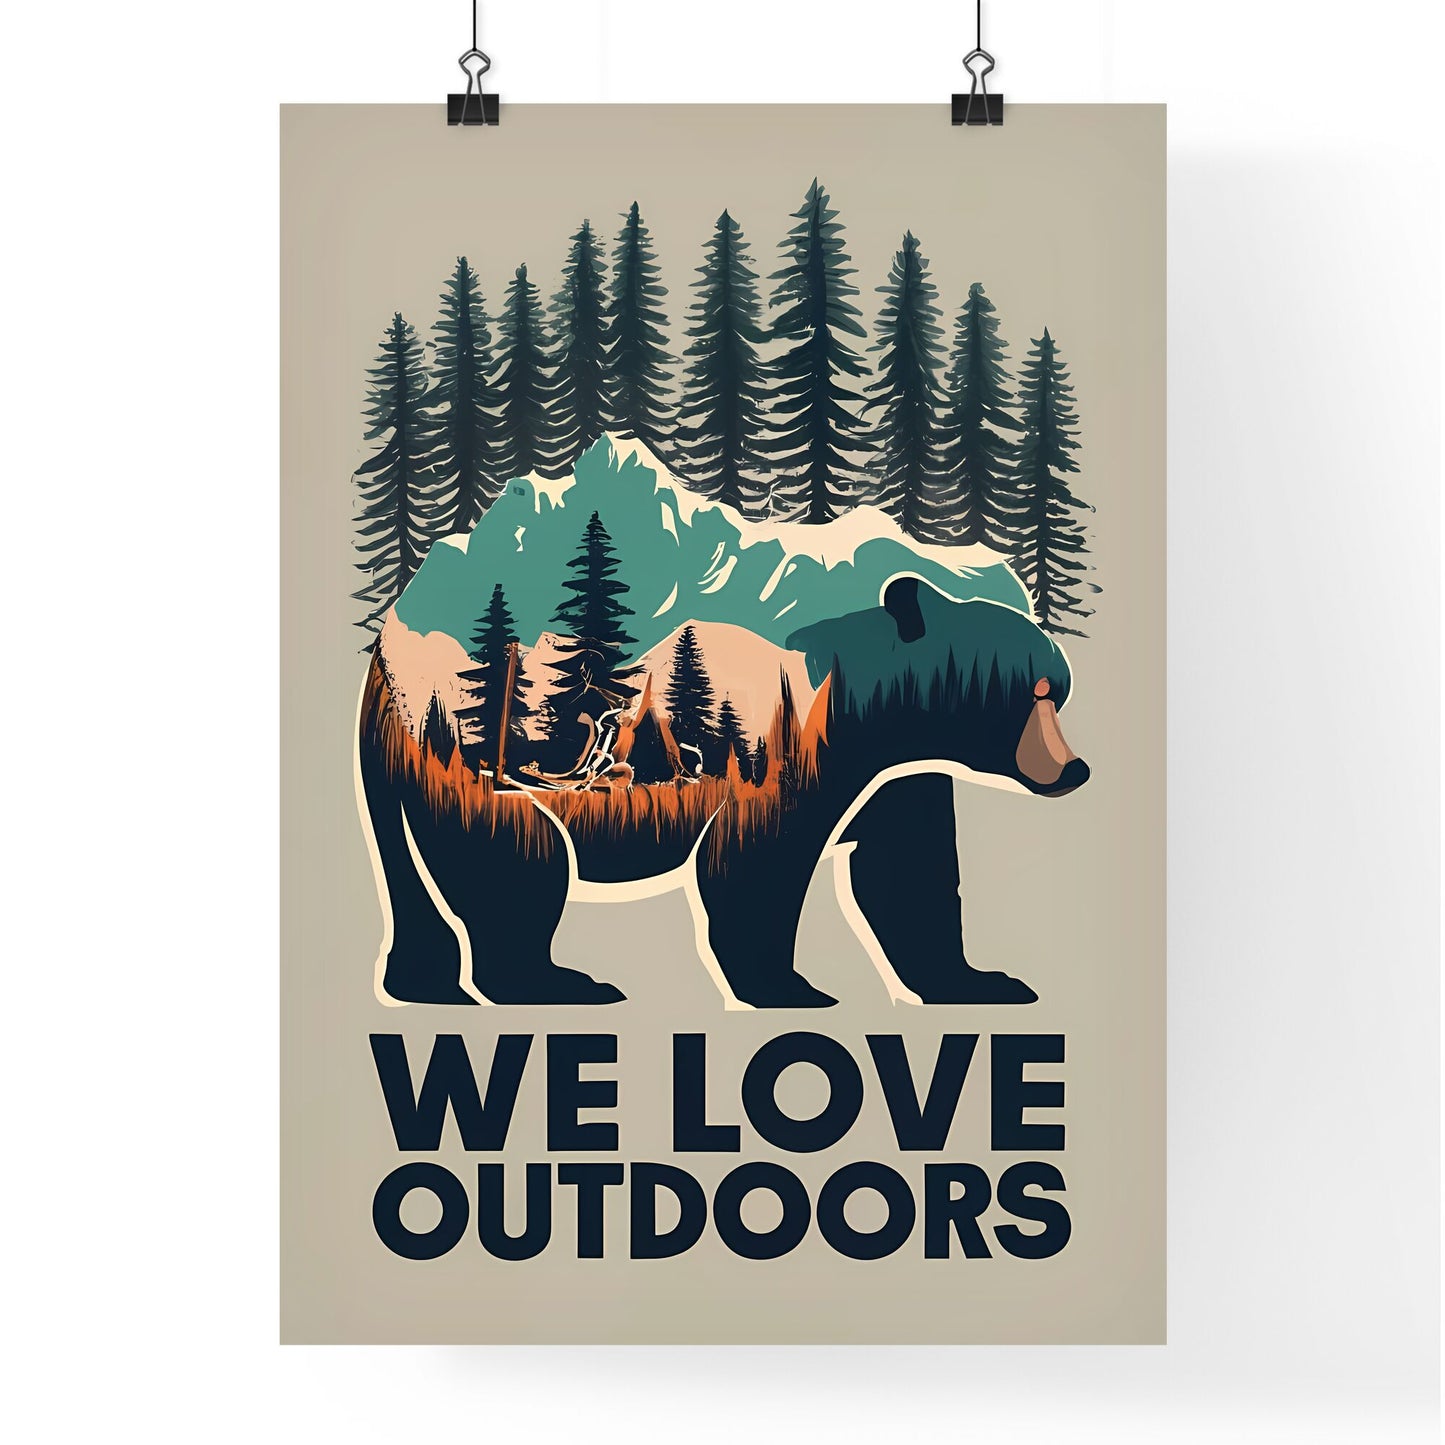 We Love Outdoors - A Bear With Trees And Mountains Art Print Default Title